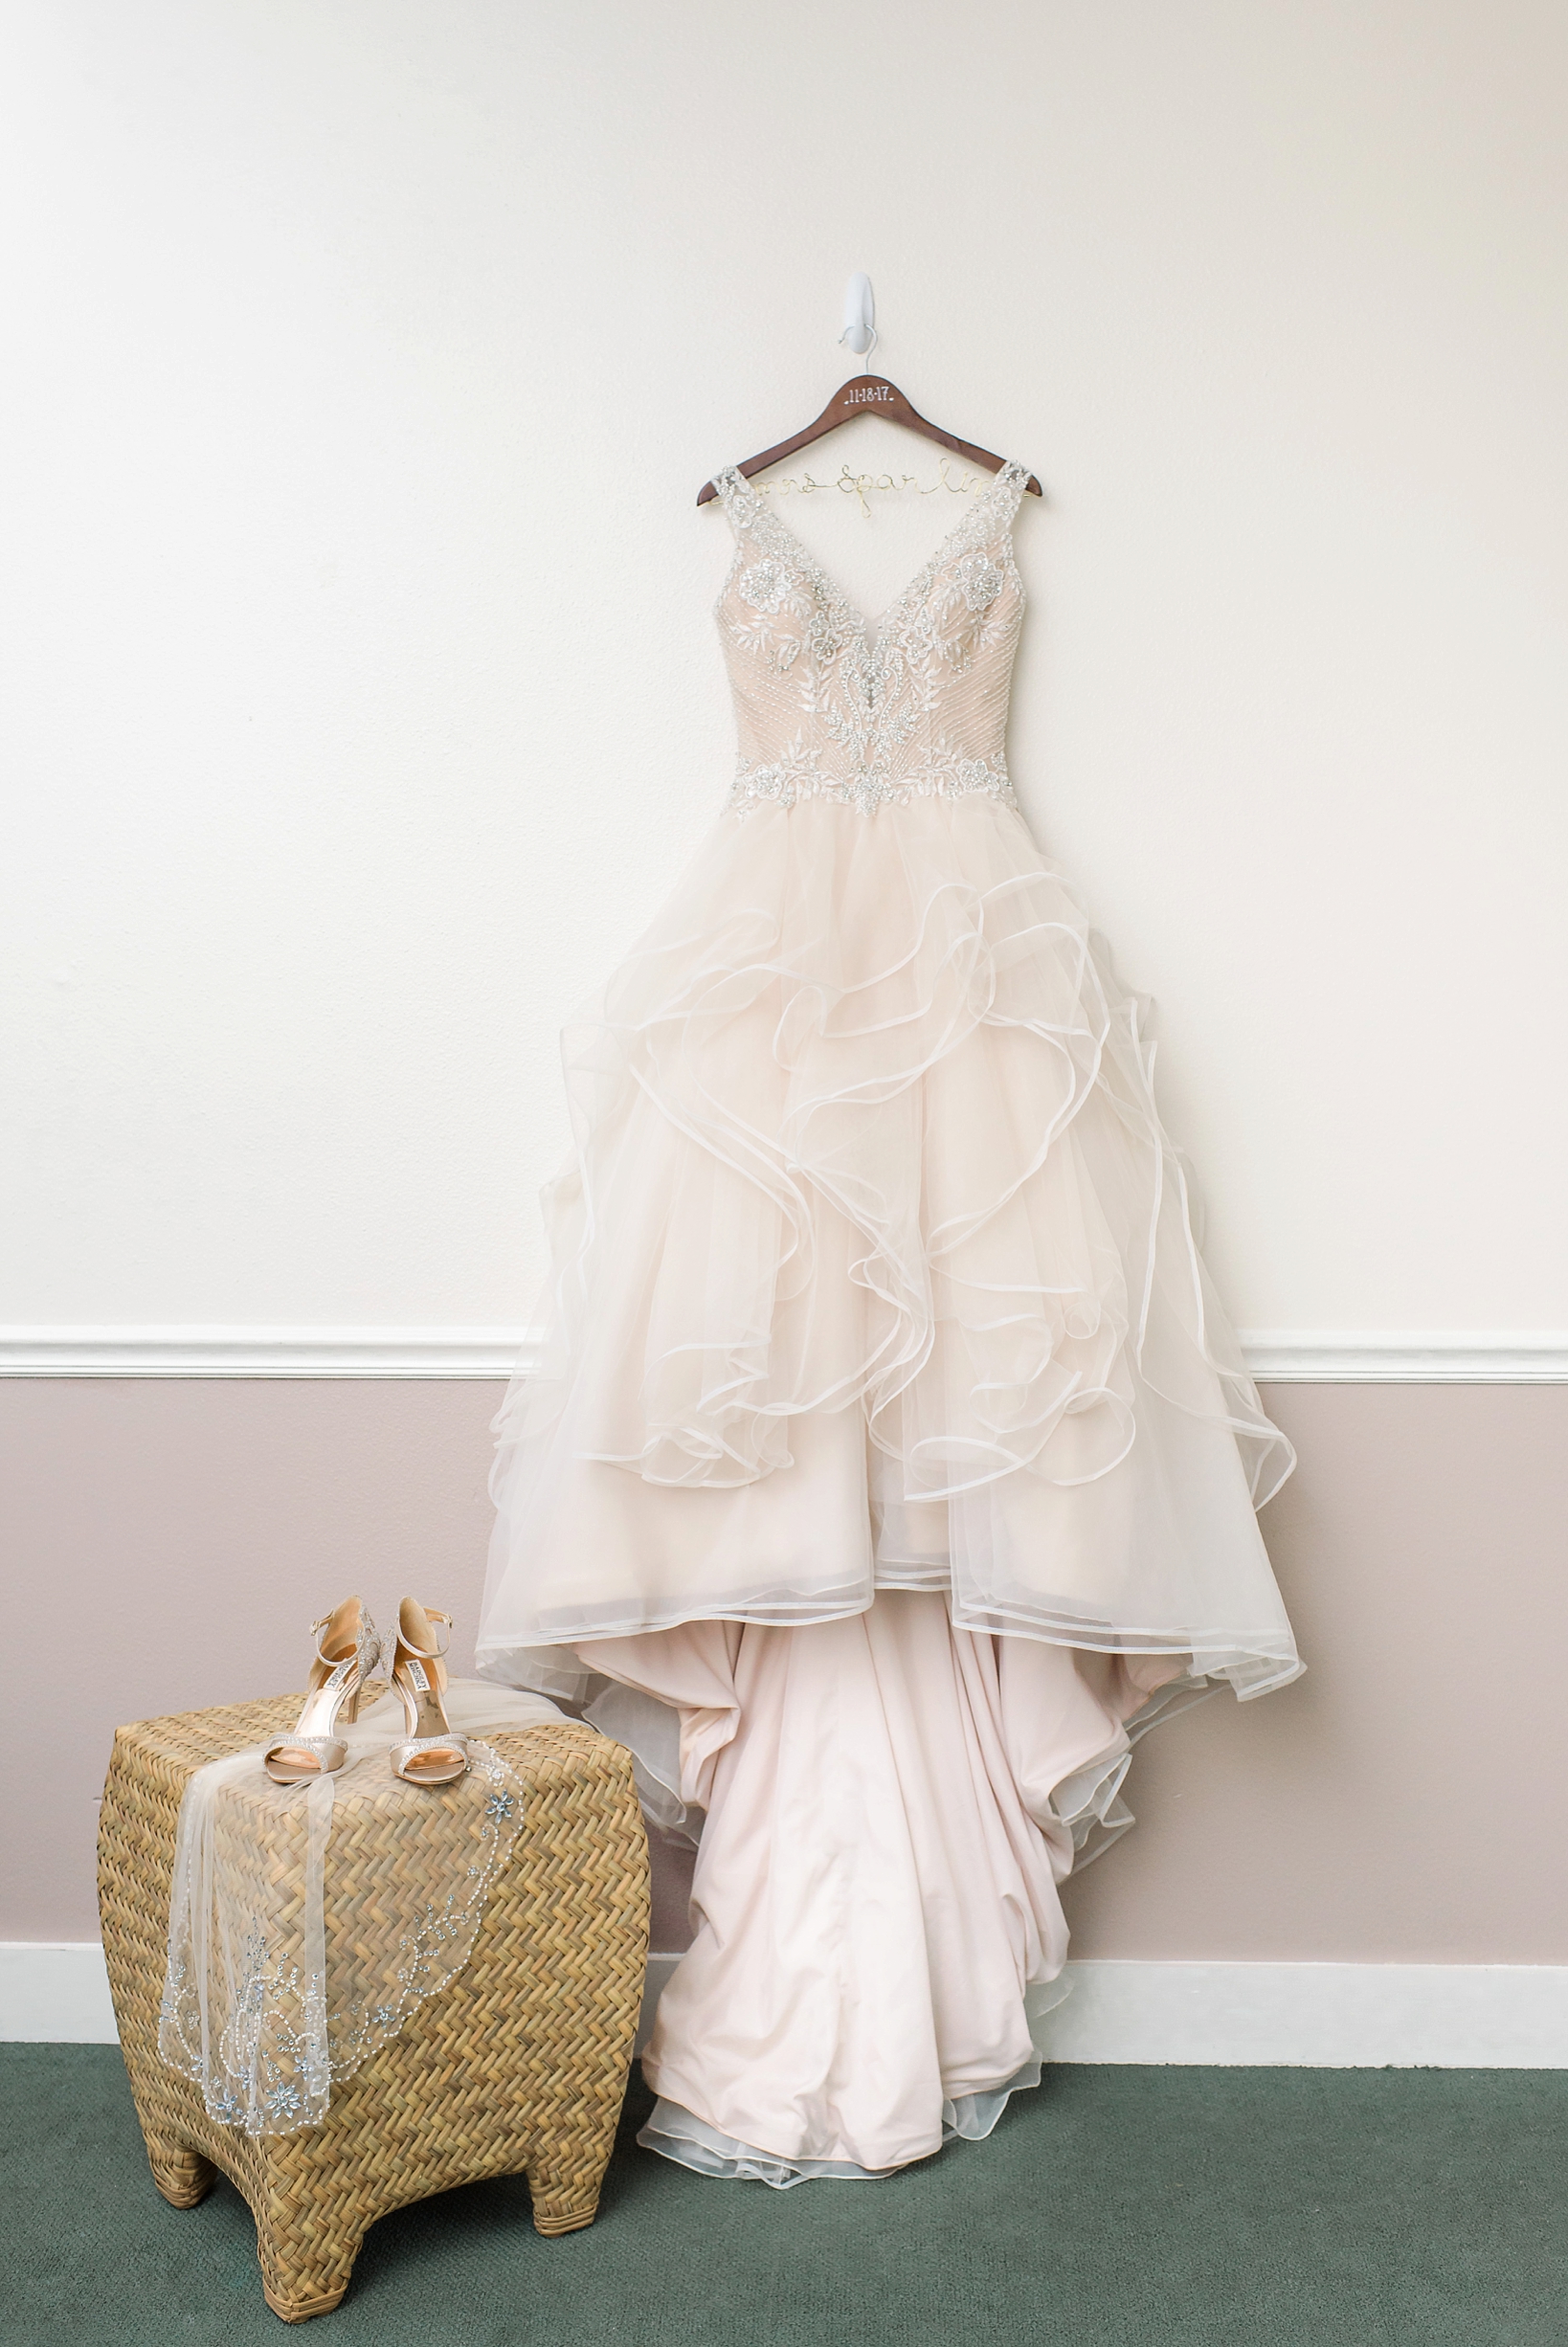 The wedding dress hanging next to the shoes and veil on a customized wooden hanger